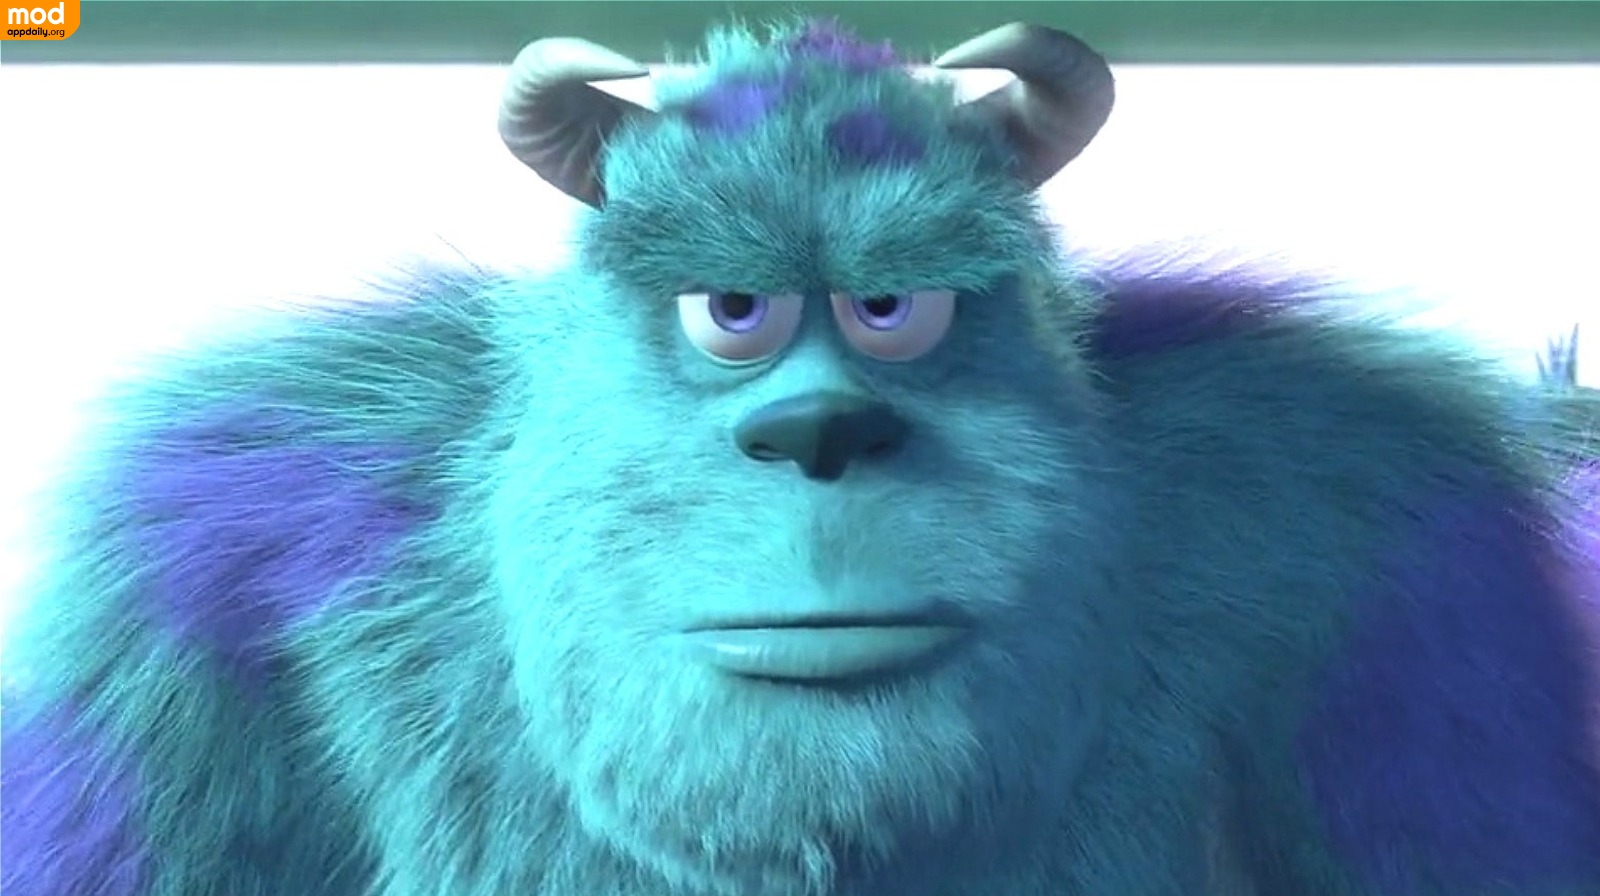 As he learned that laughter was 10 times more potent than screaming, Sullivan - Blue Monster from Monsters Inc introduces the idea of harvesting human children's laughter in Monsters at Work